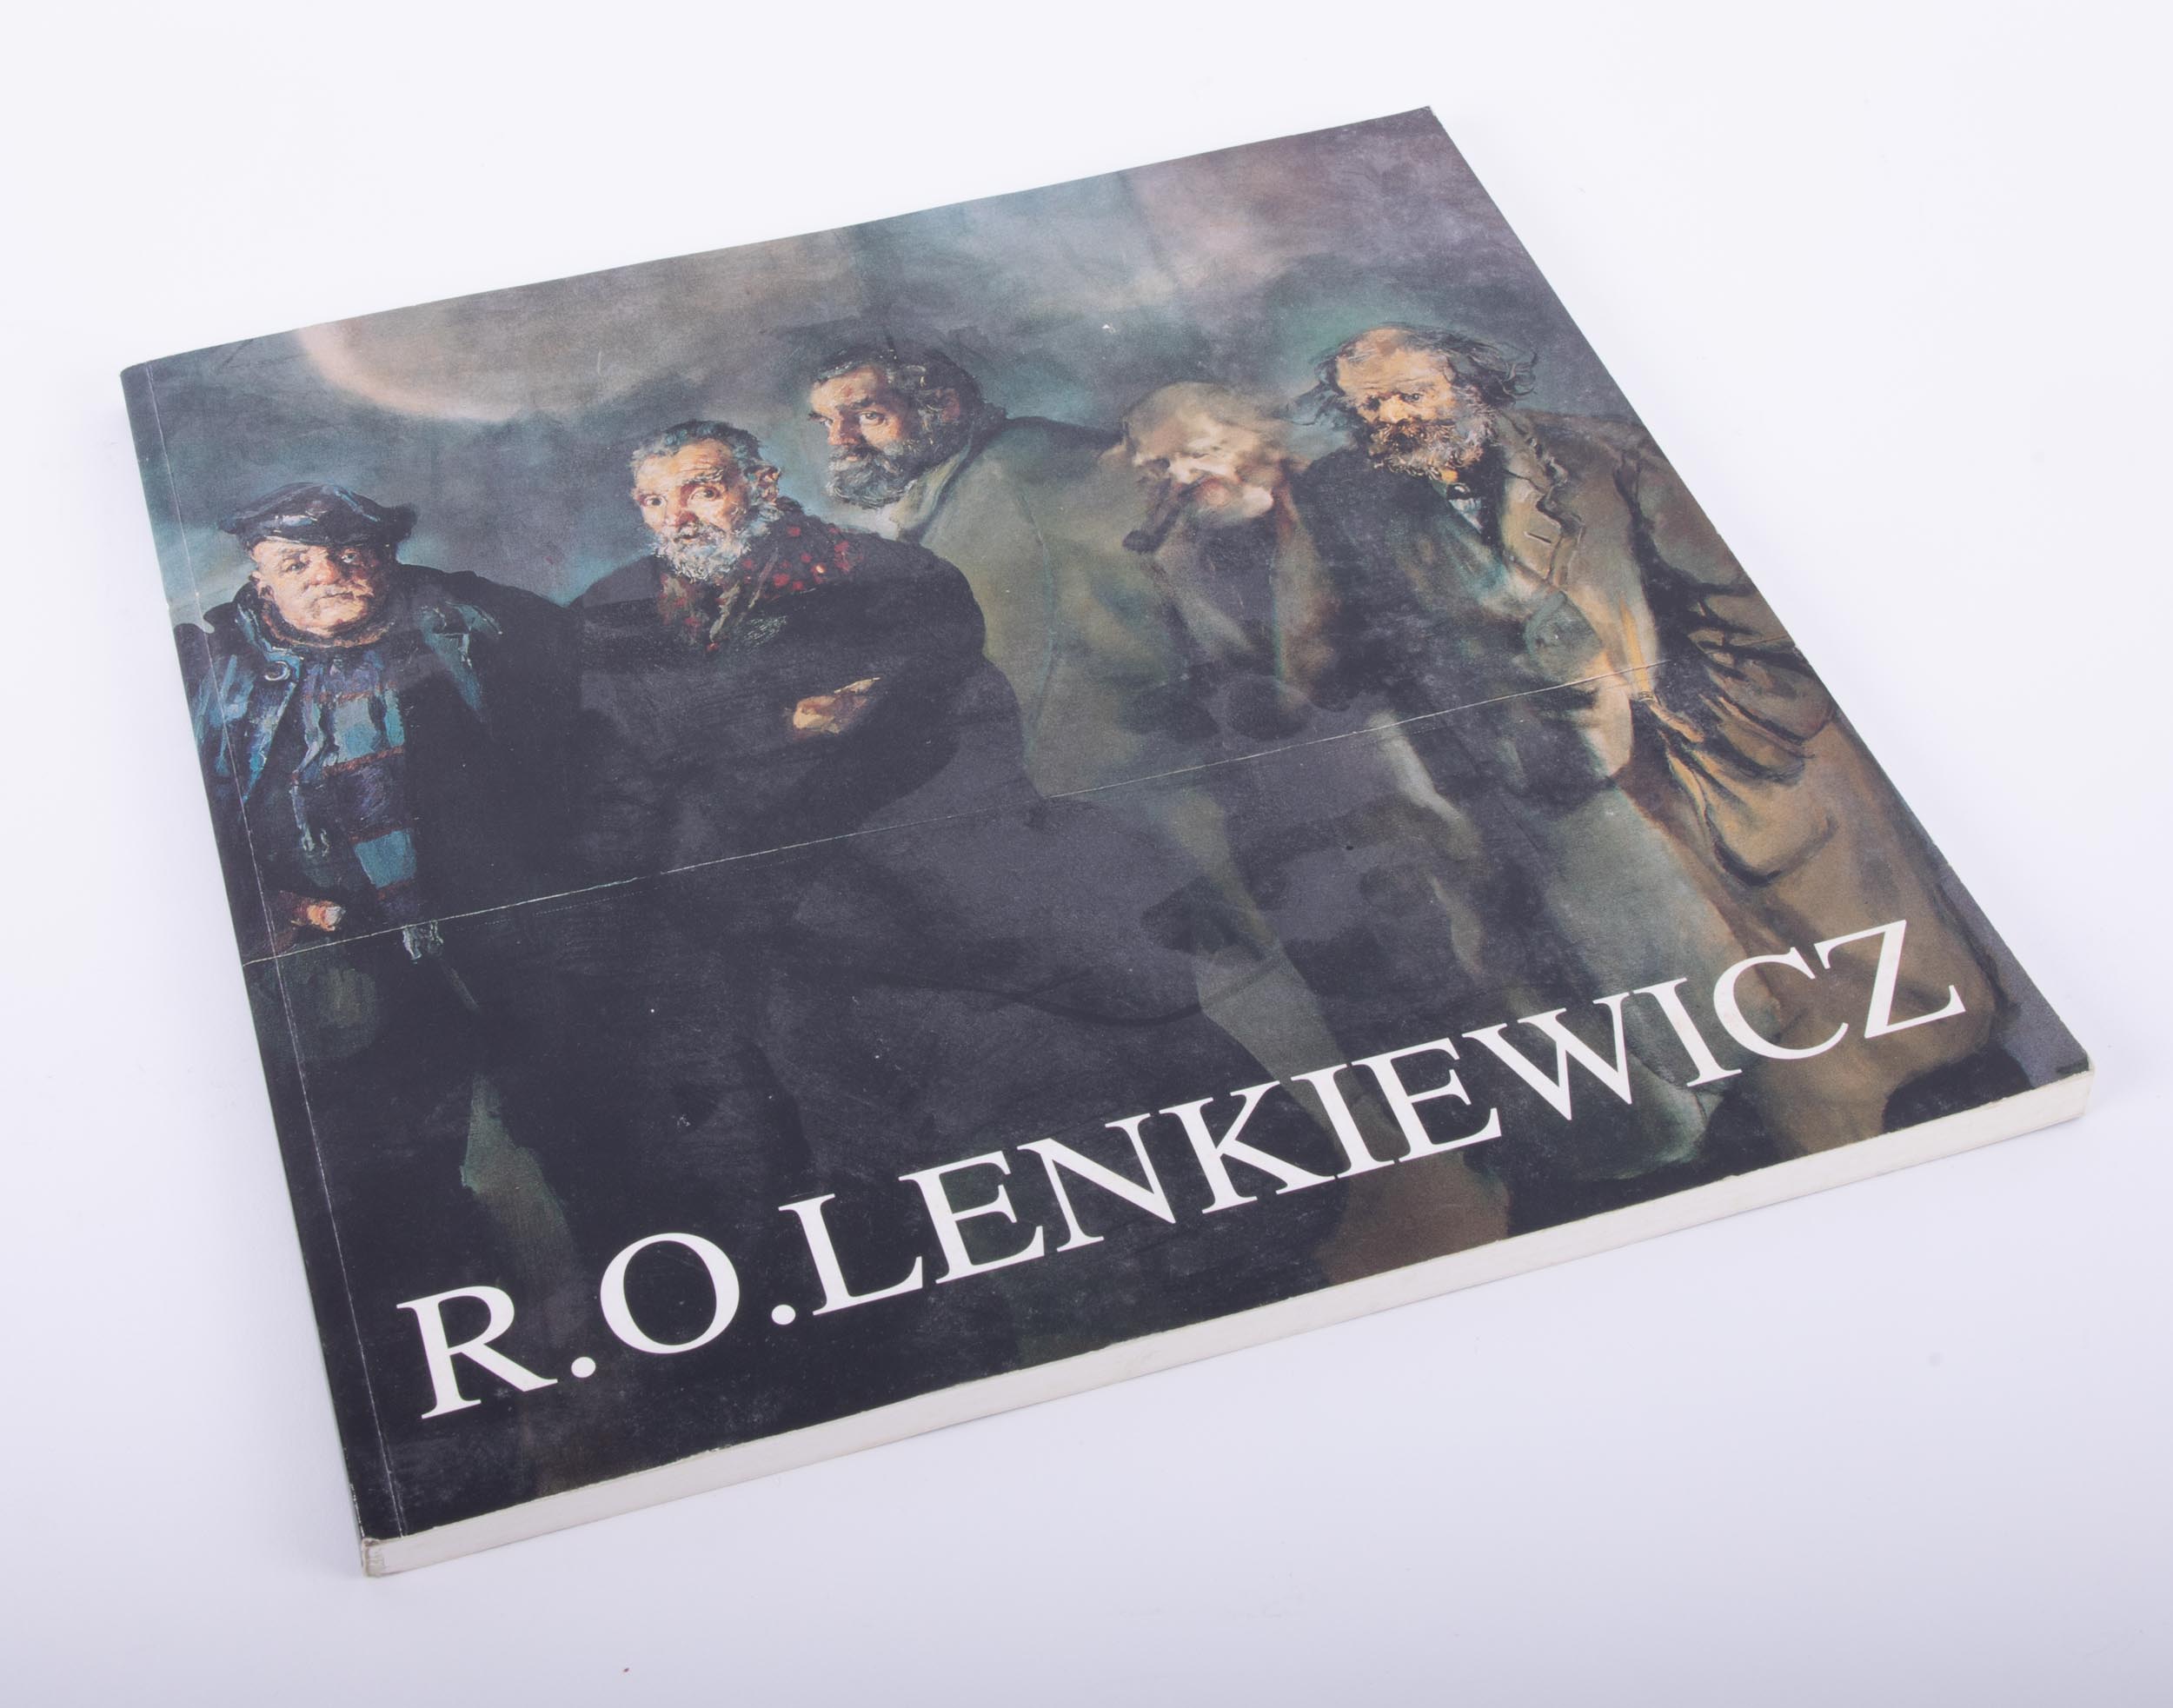 Robert Lenkiewicz single volume, inscribed and signed, published by White Lane Press 1997.